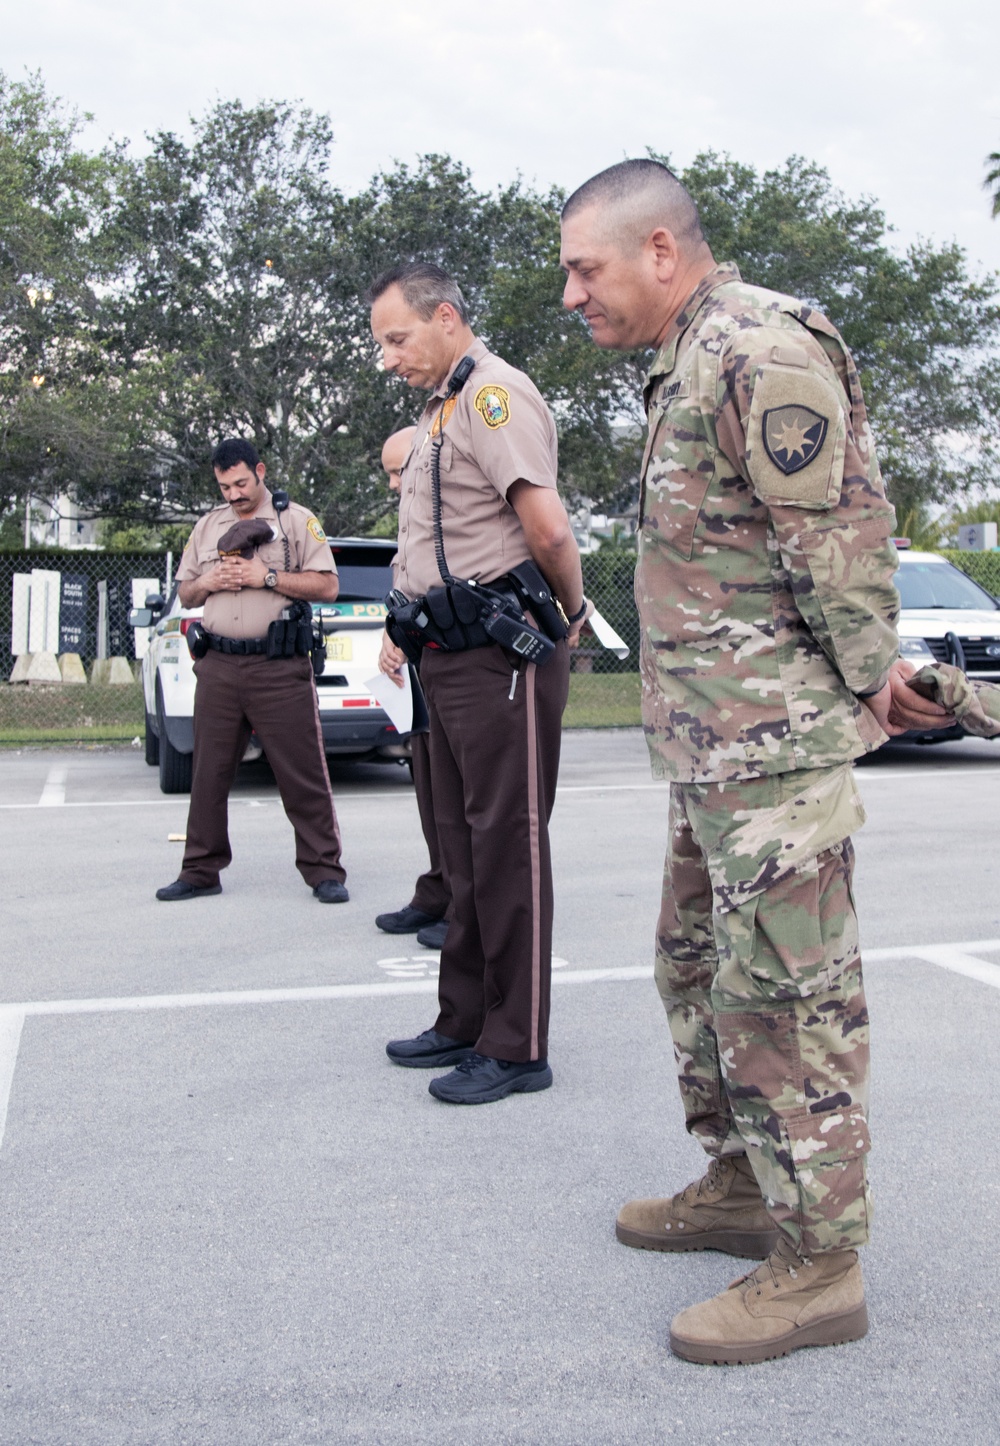 Florida National Guard Chaplain supports Soldiers and first responders during the COVID-19 response